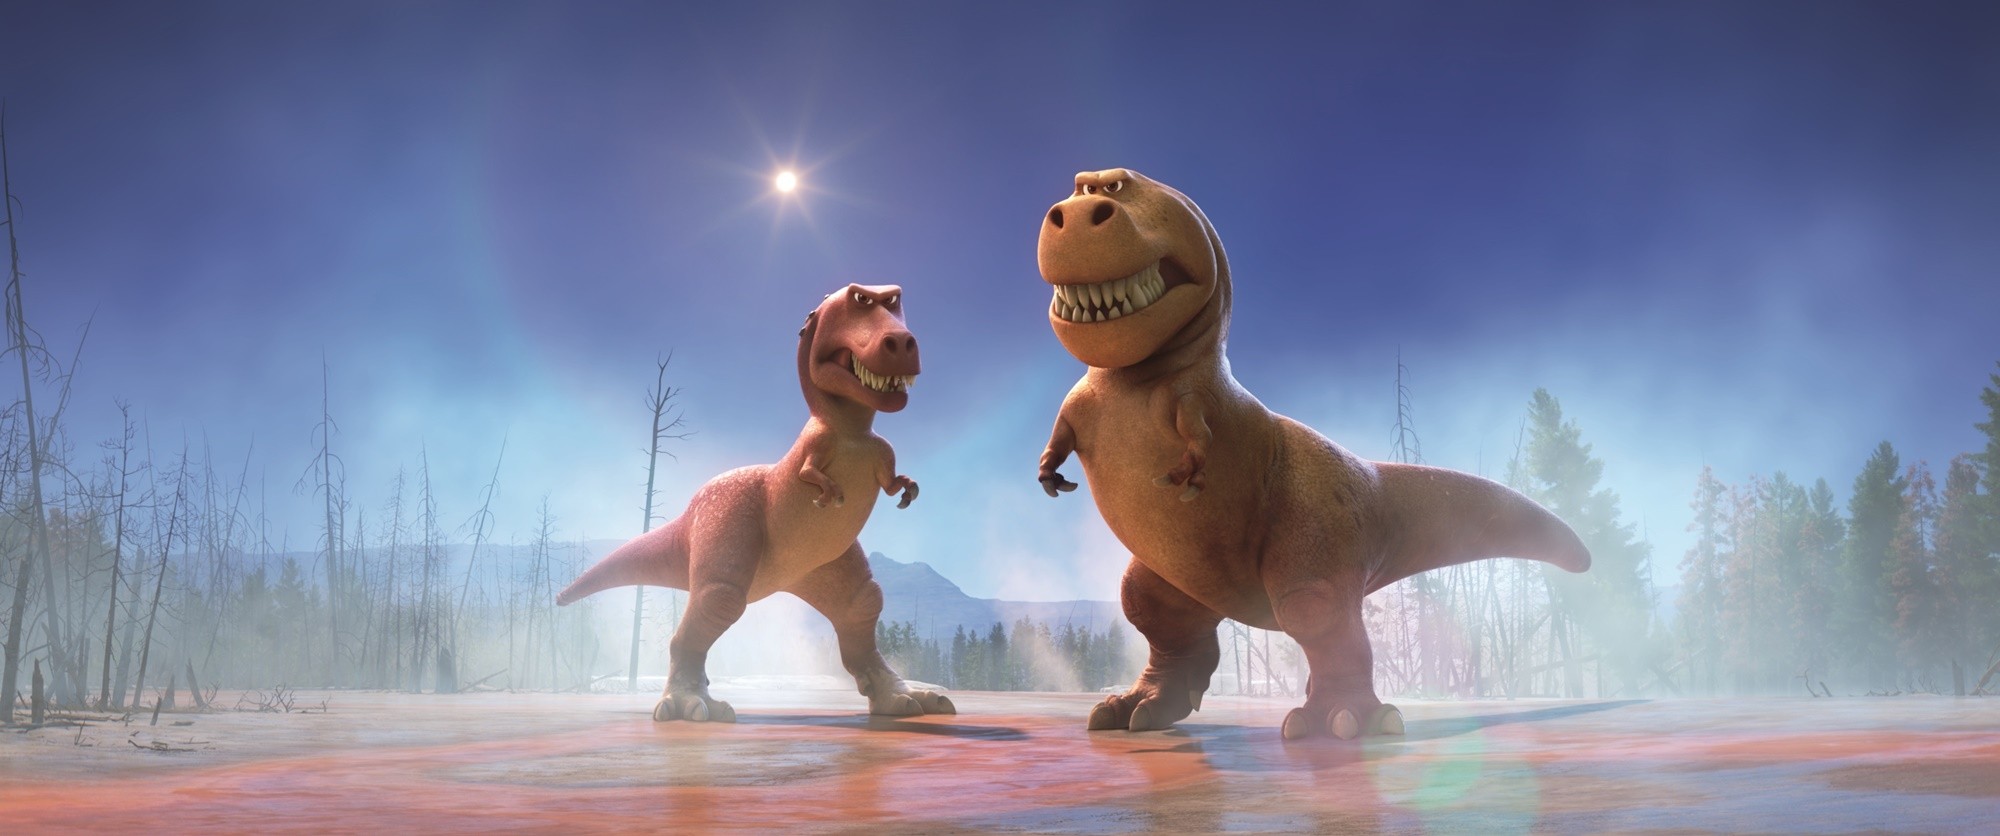 T-Rexes from Walt Disney Pictures' The Good Dinosaur (2015)